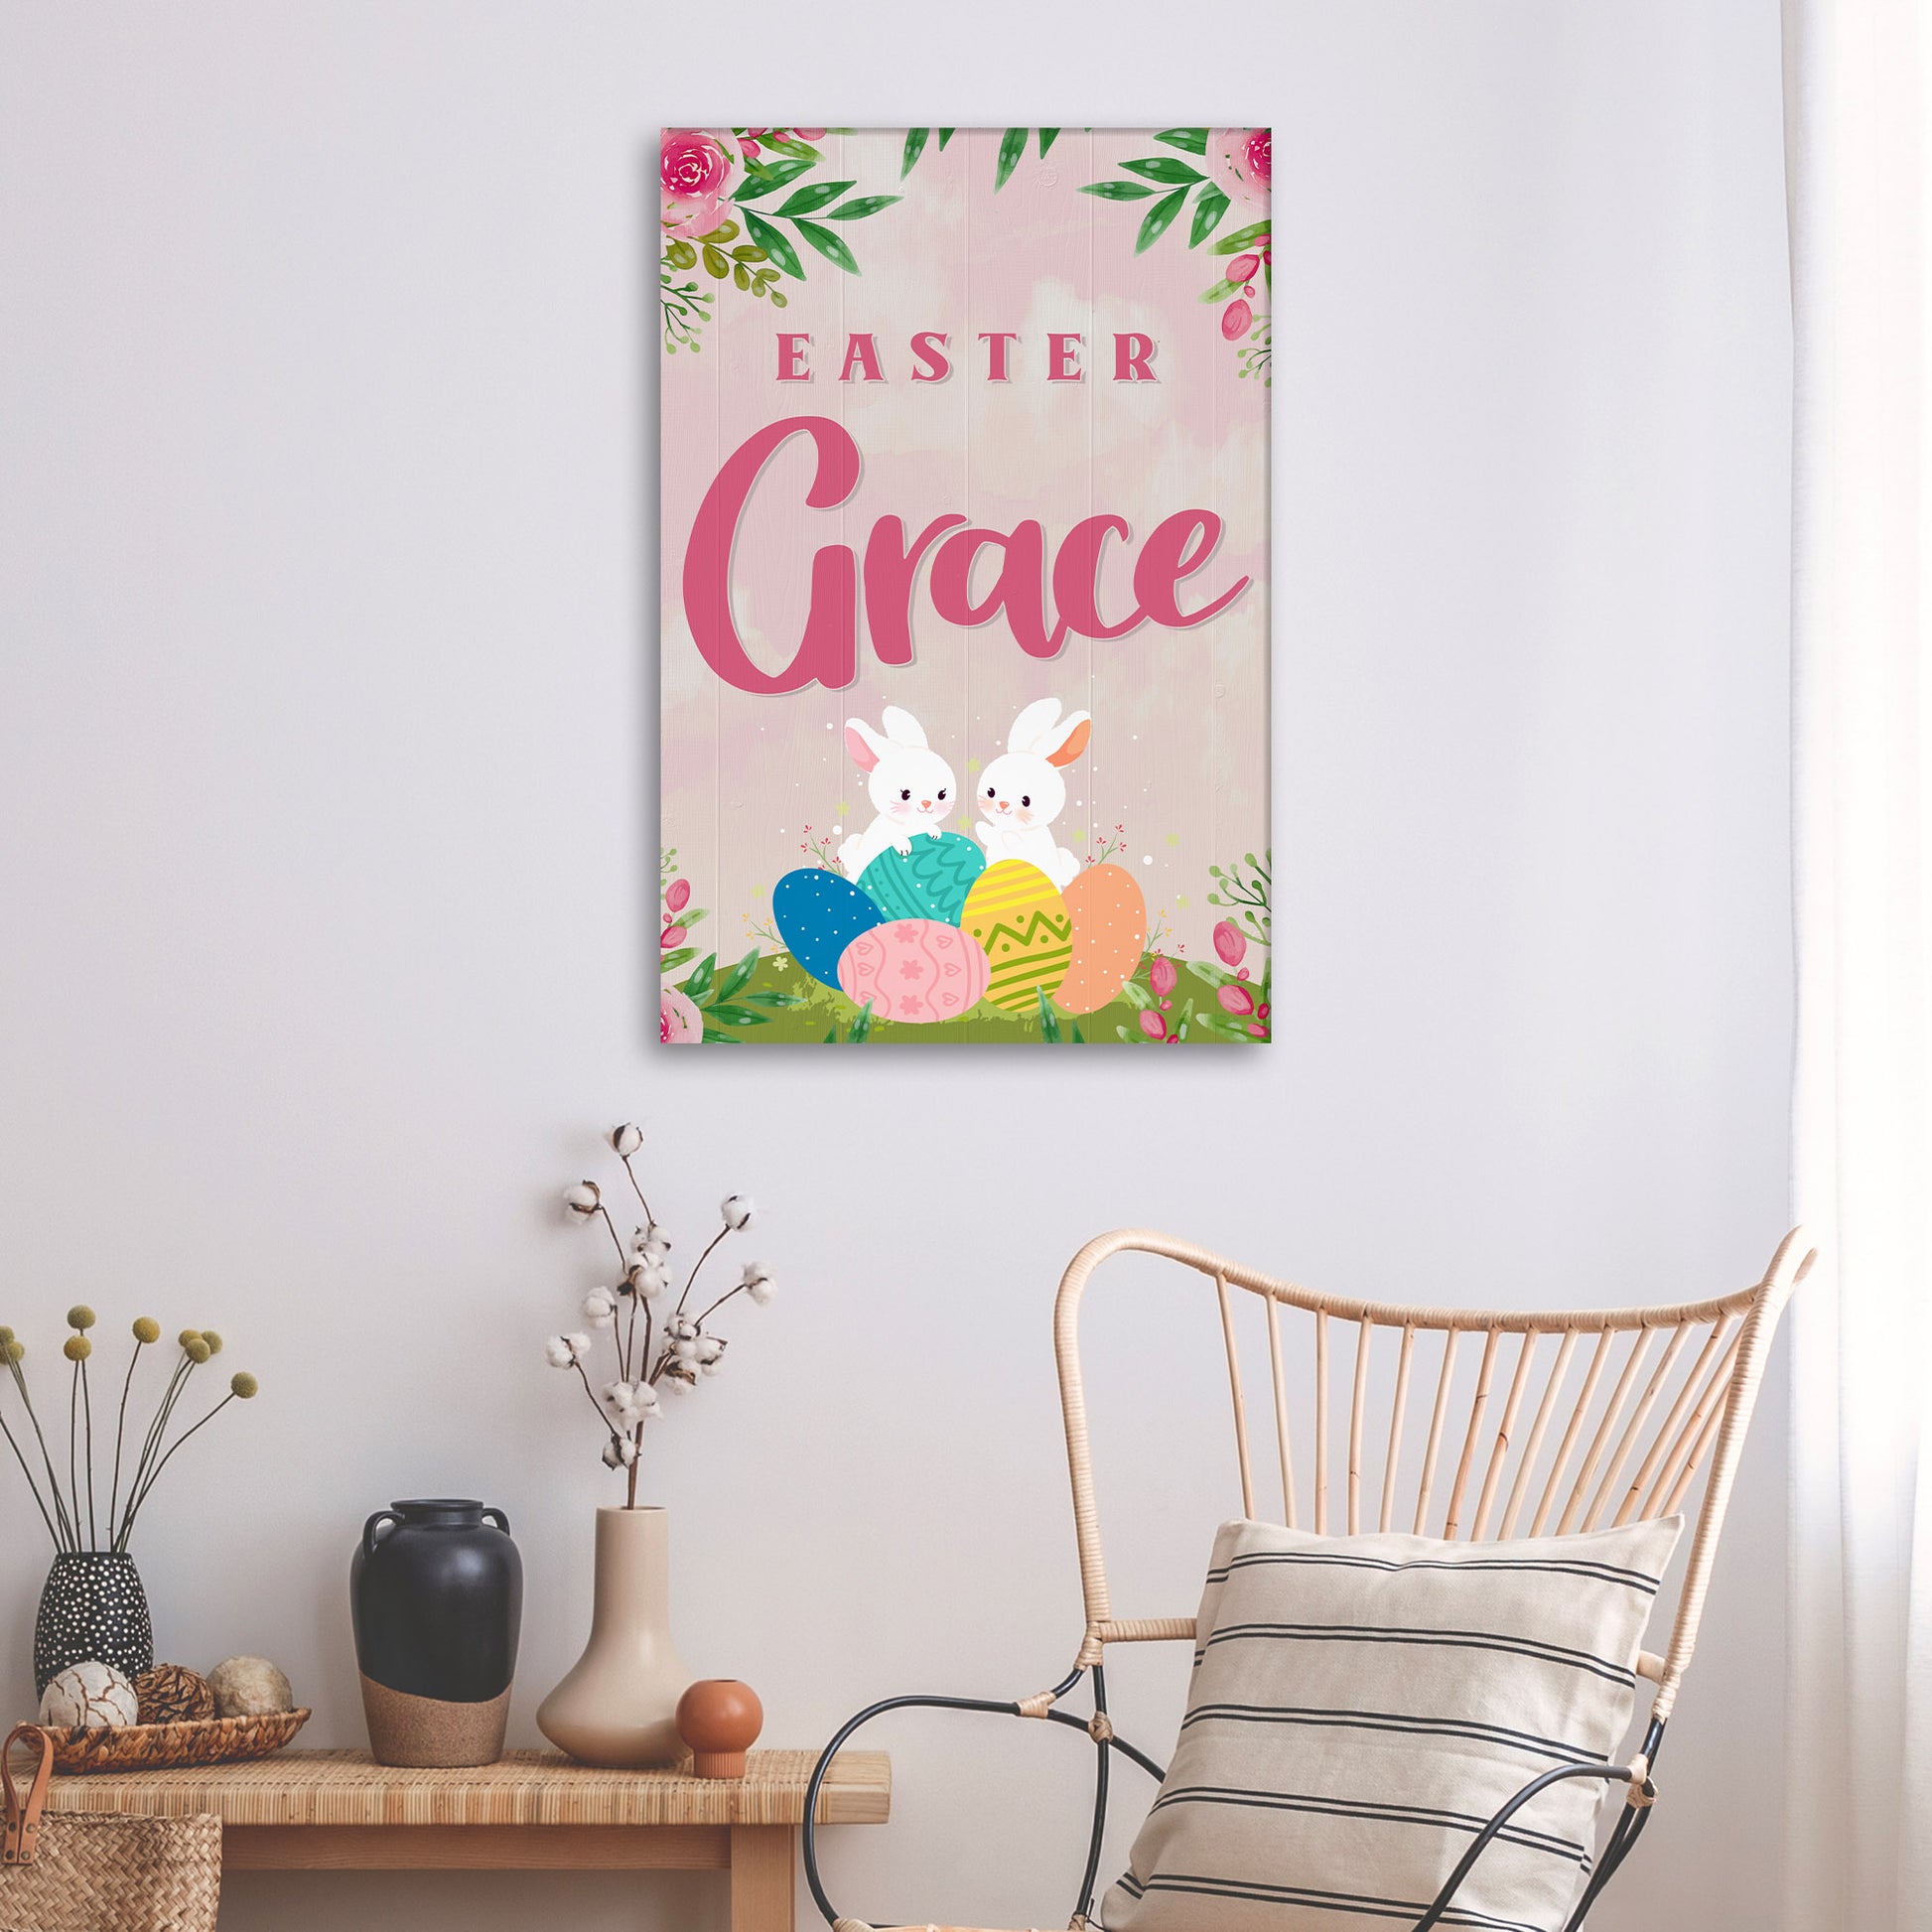 Easter Grace Sign - Image by Tailored Canvases